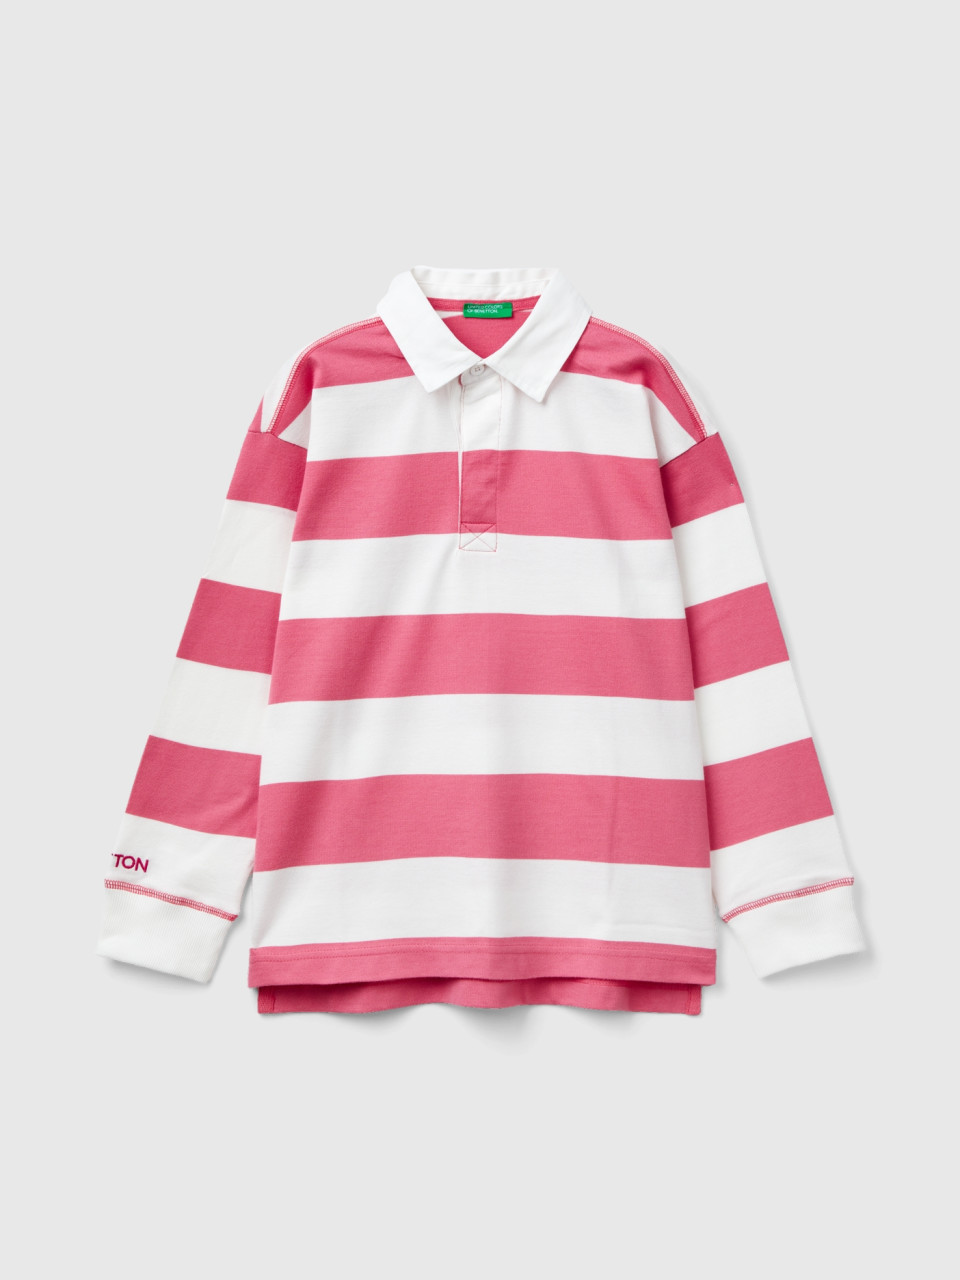 Benetton, Rugby Polo With Pink And White Stripes, Multi-color, Kids